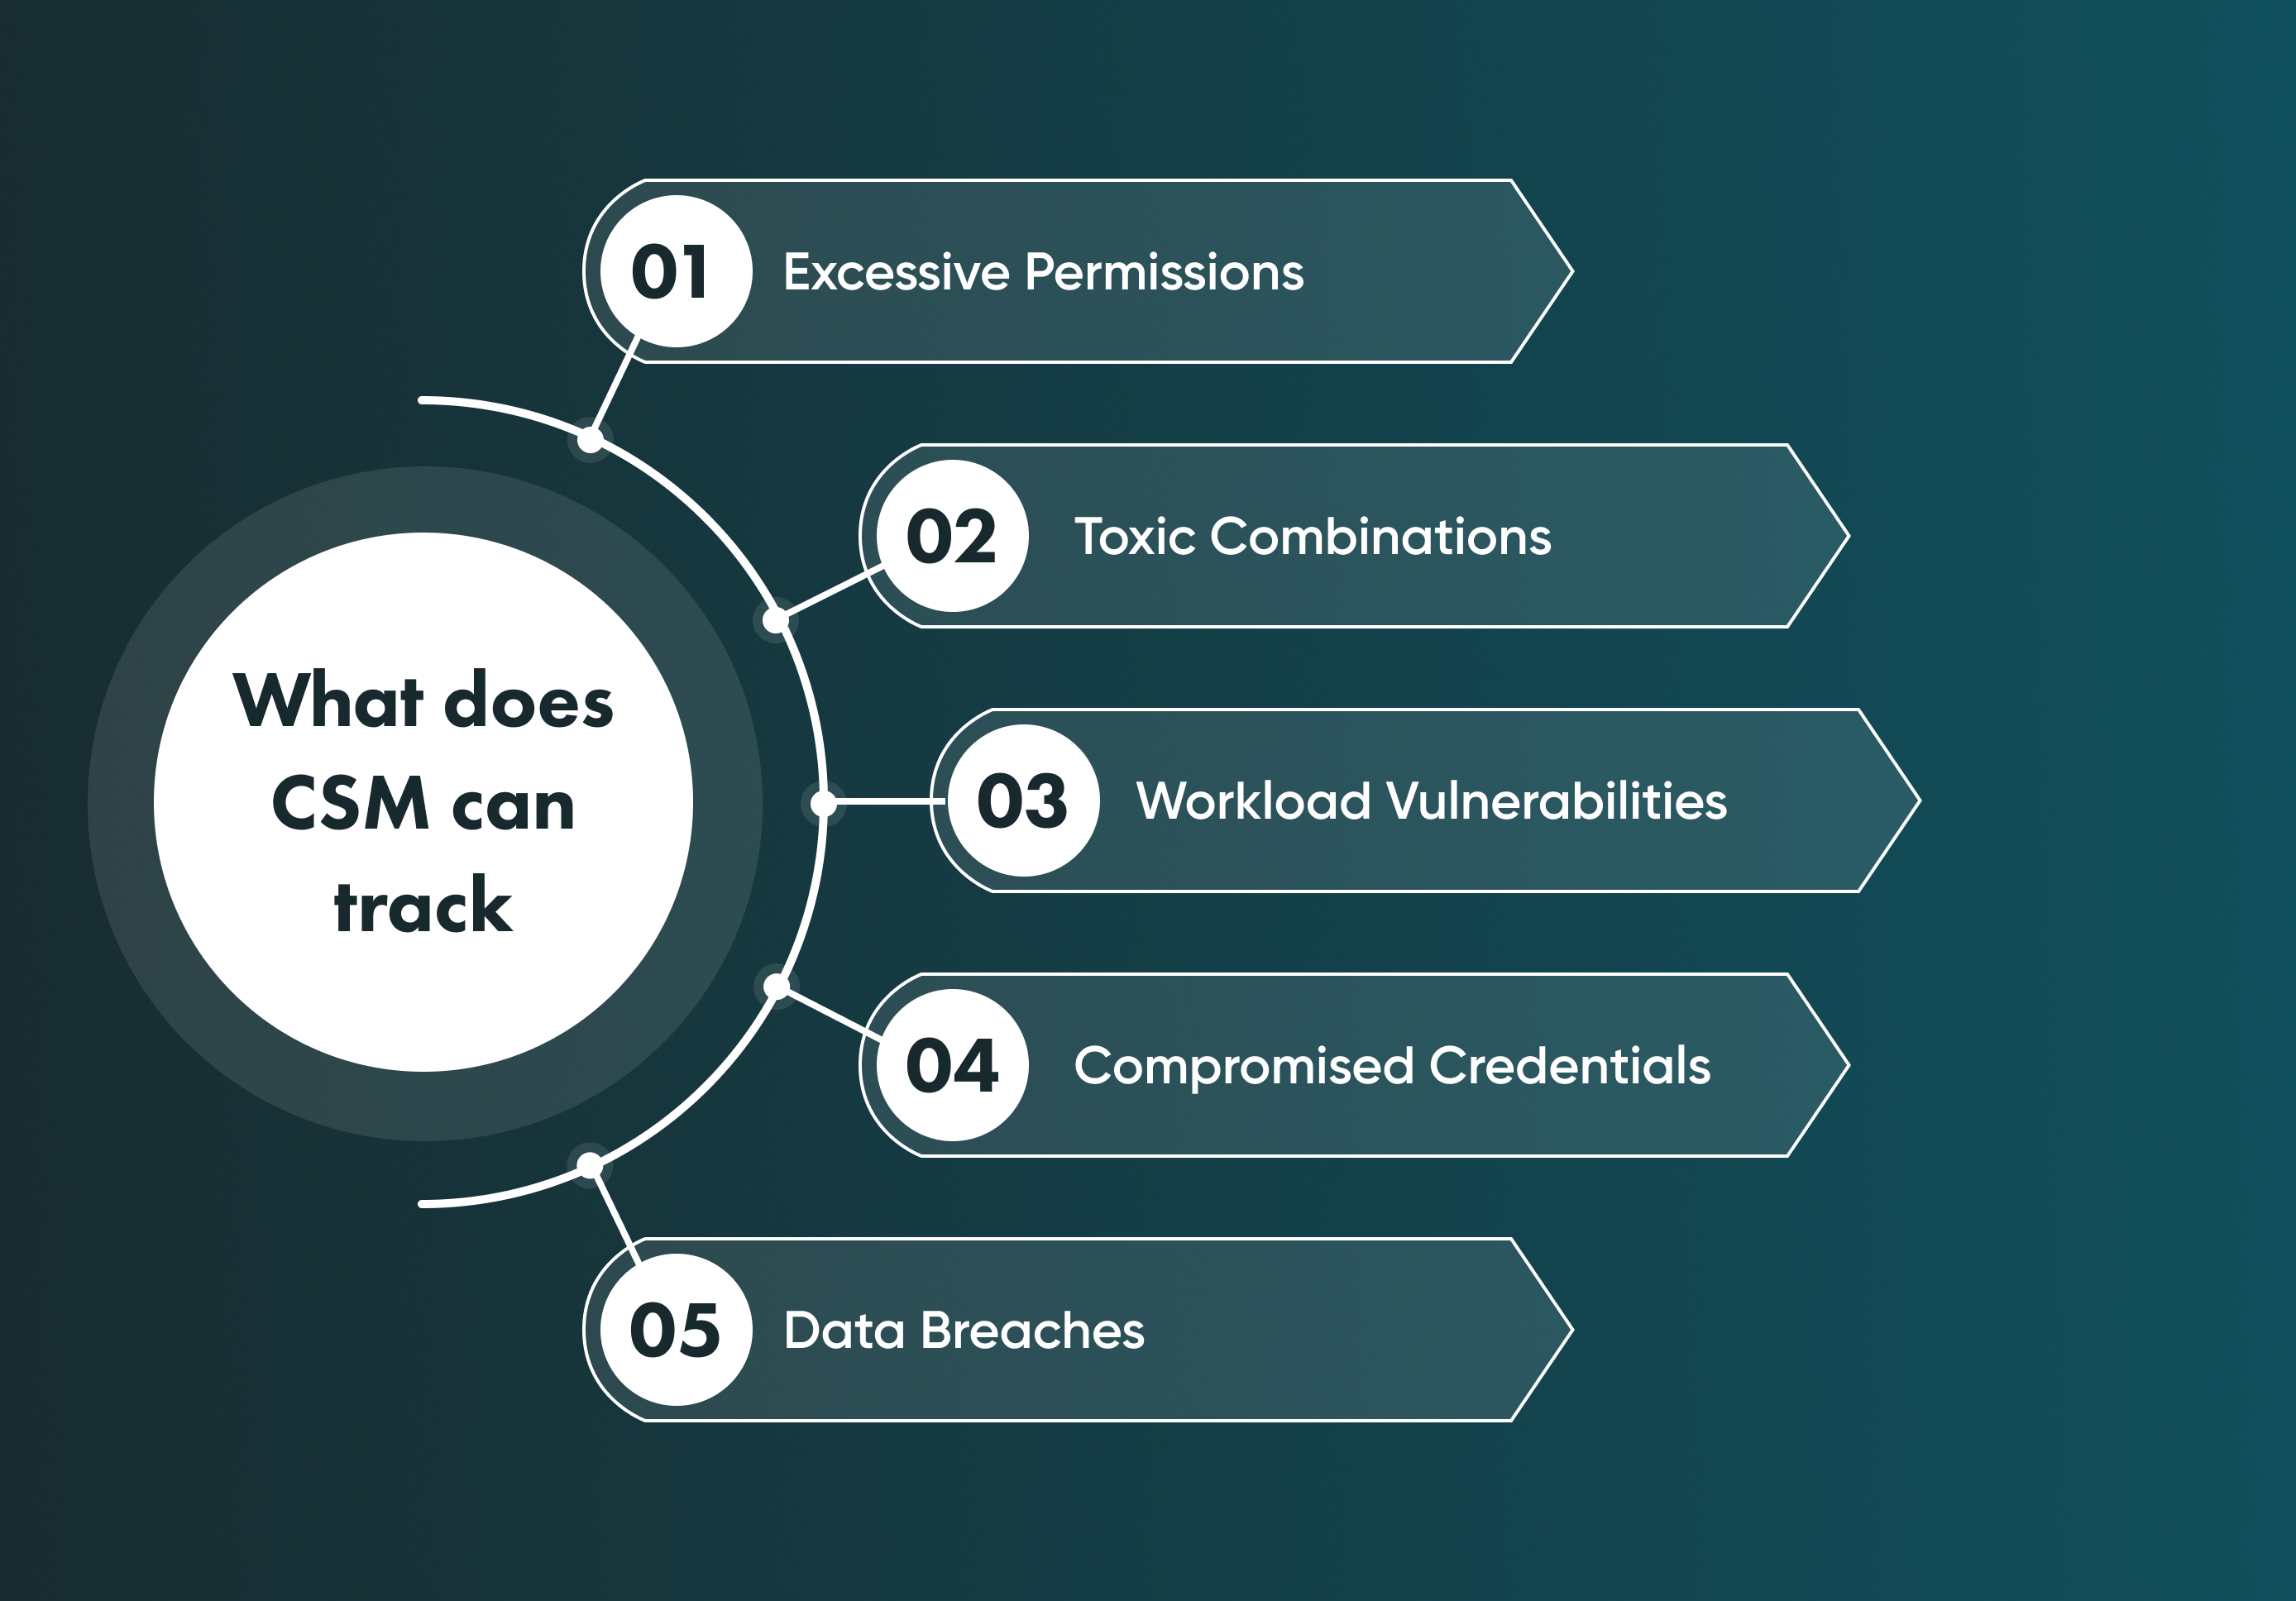 Among targets of CSM, the most important are Excessive Permissions, Toxic Combinations, Workload Vulnerabilities, Compromised Credentials, and Data Breaches.